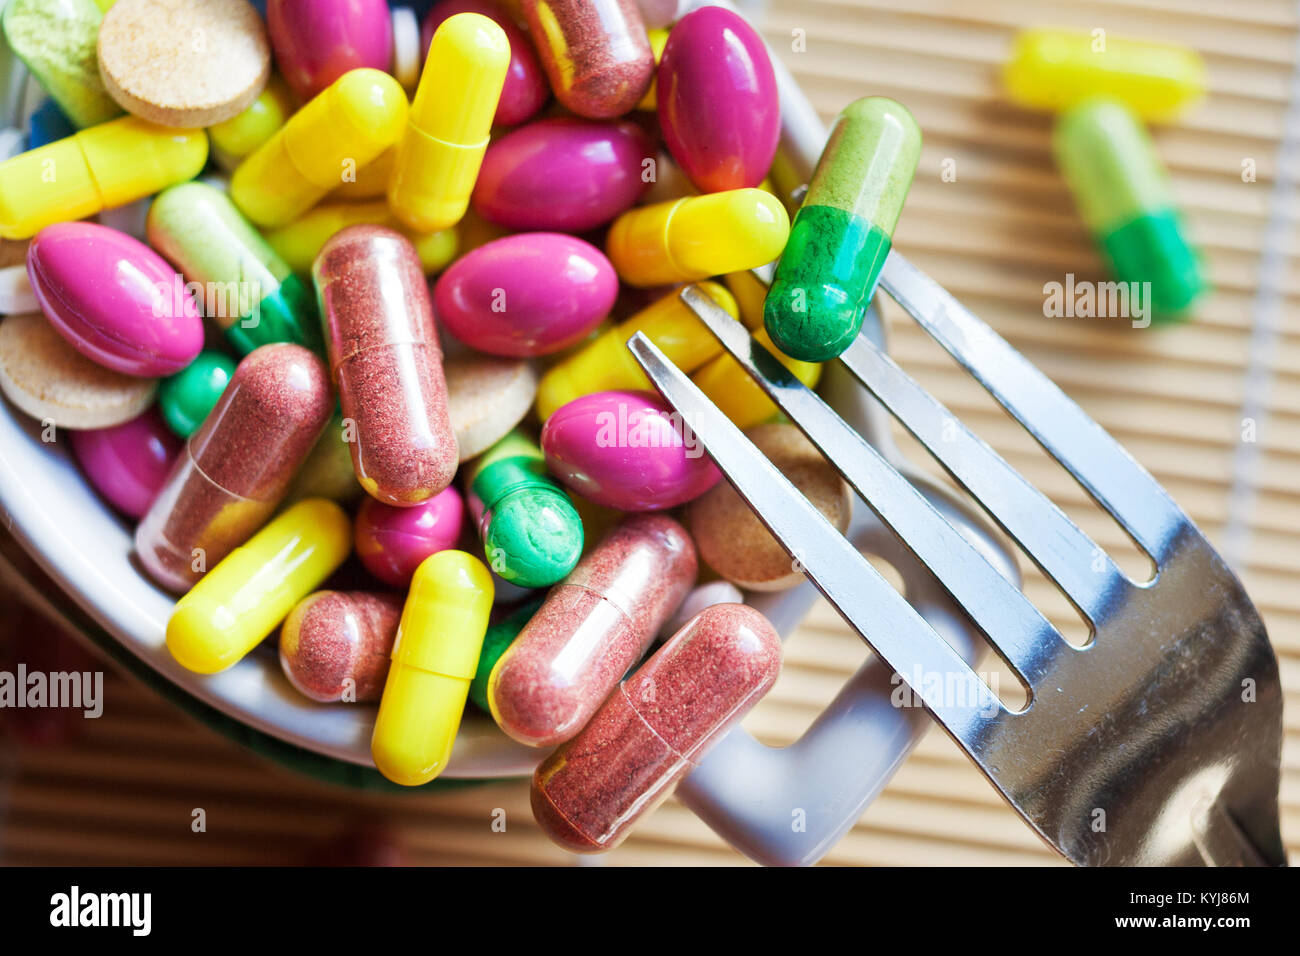 health care and wellness - diet pills and loosing weight - various tablets in a pot with forks Stock Photo